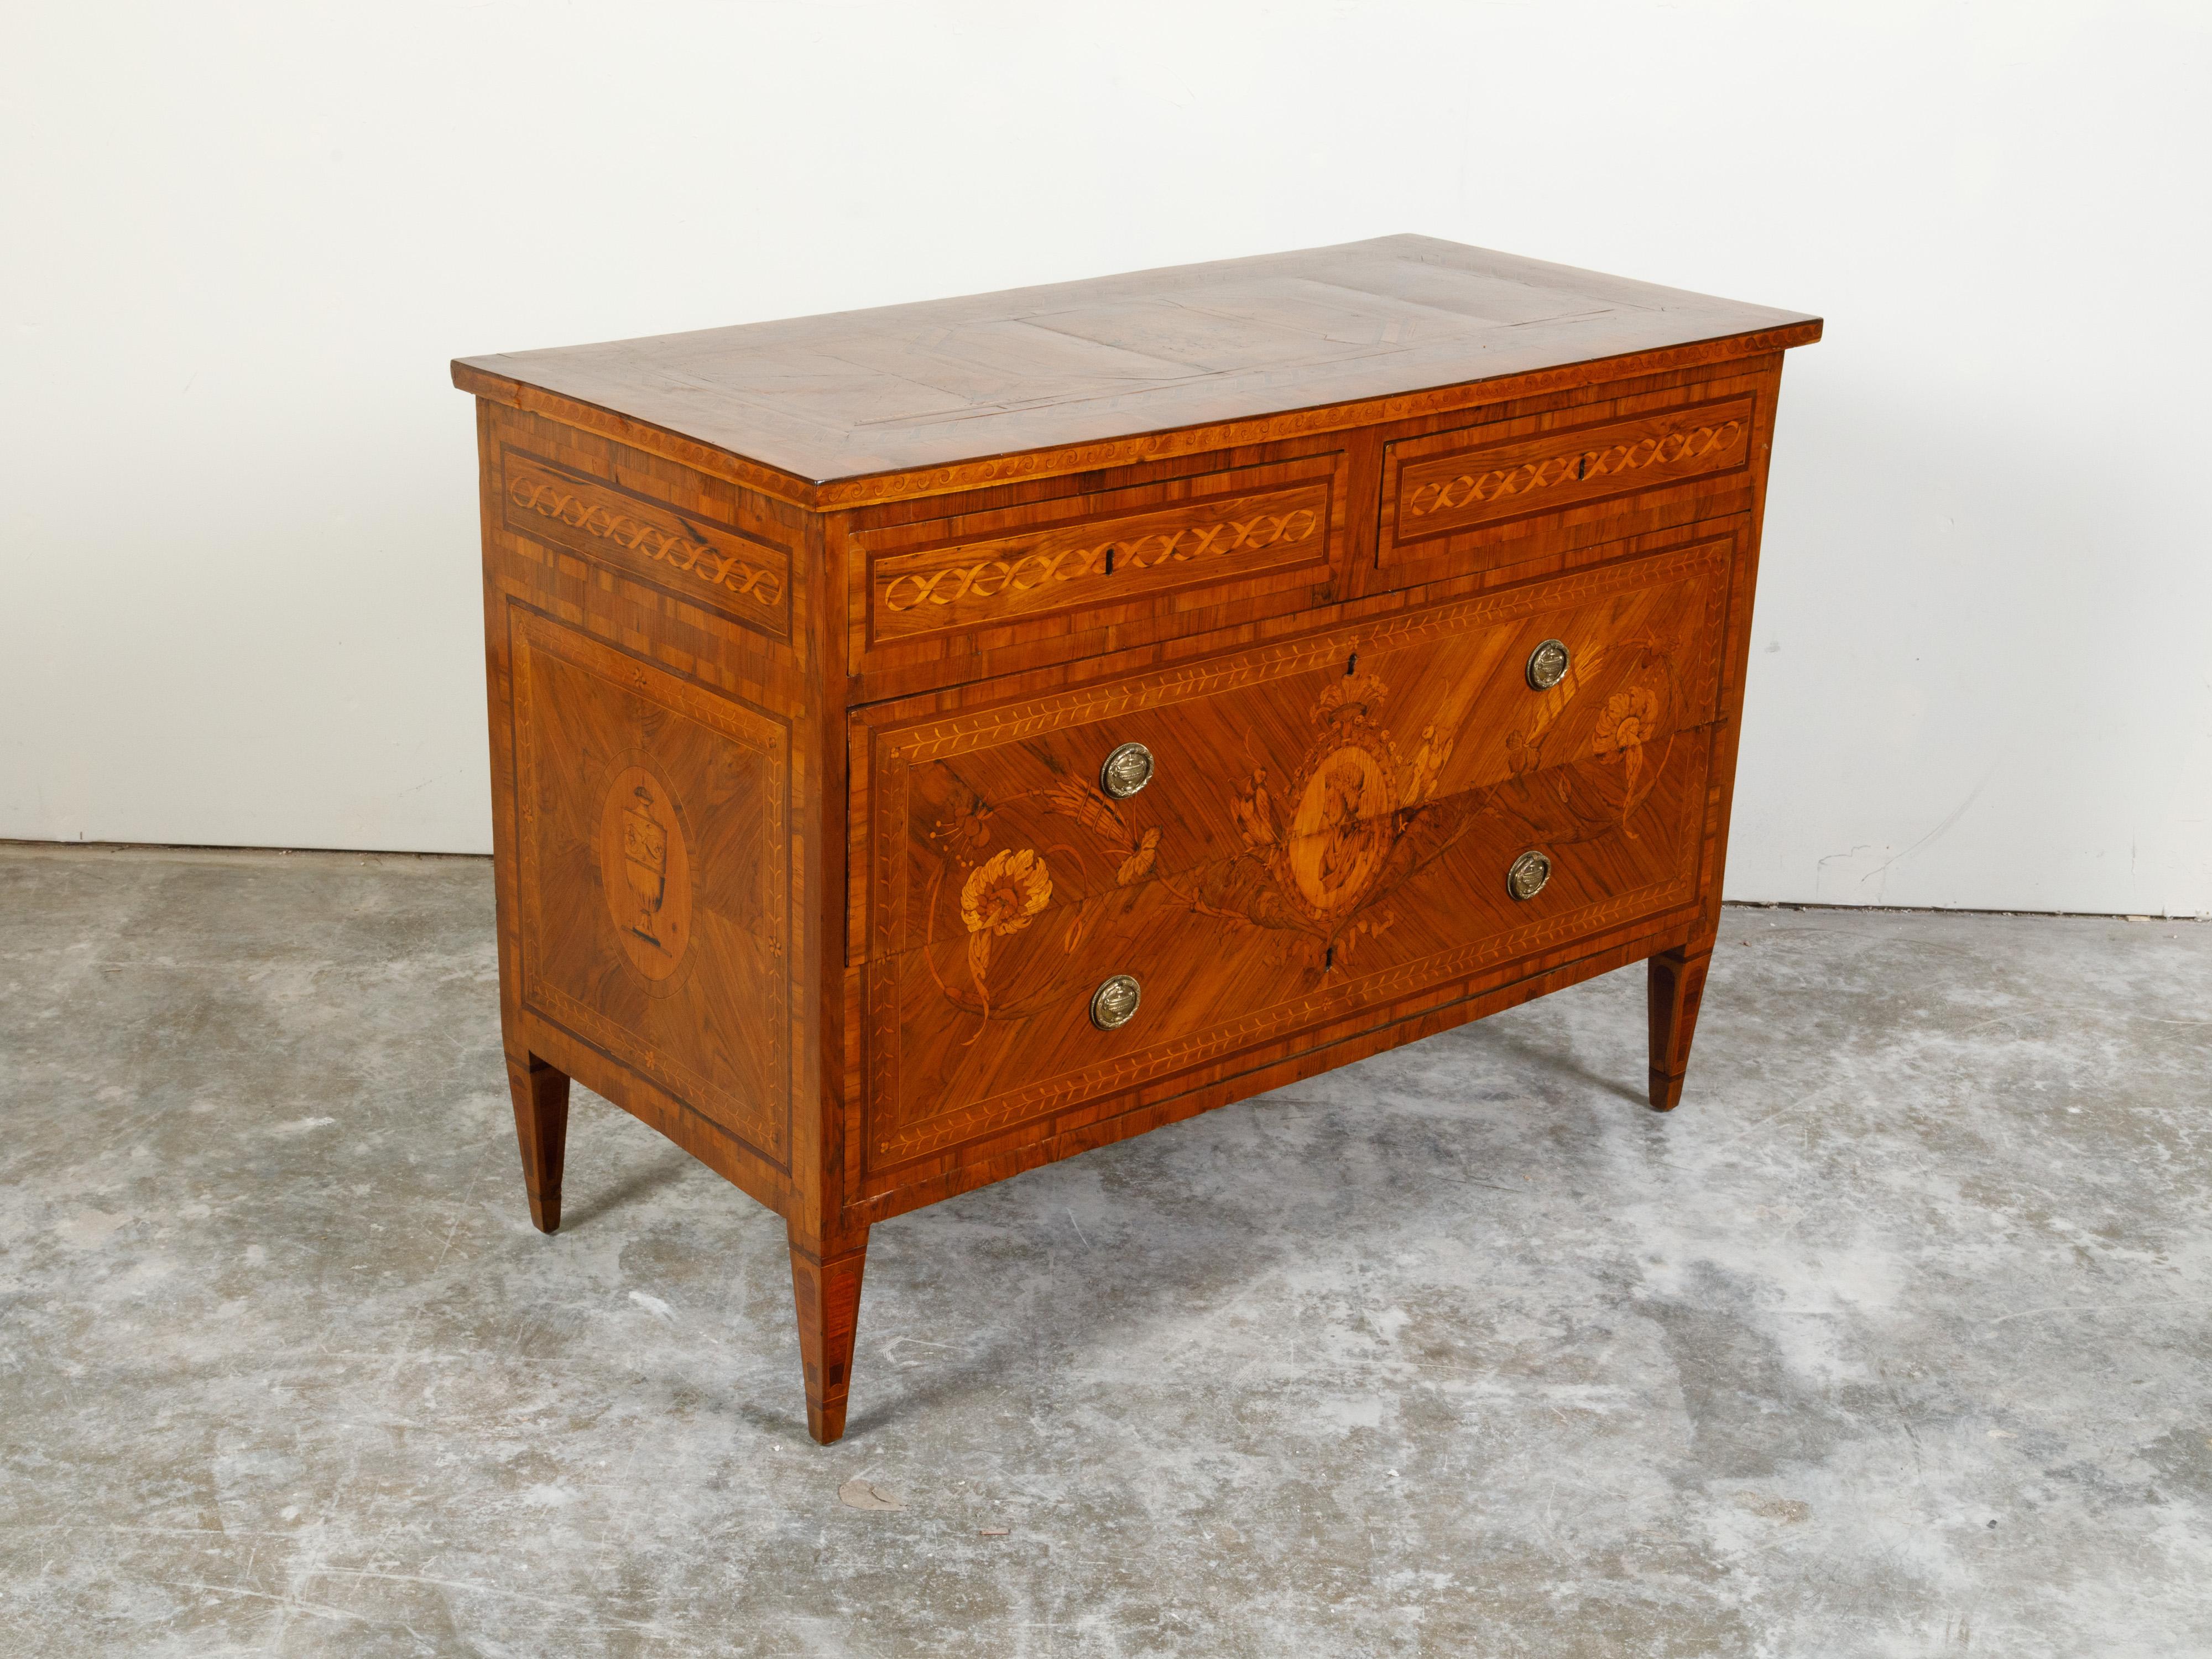 Italian Neoclassical Period 1800s Fruitwood Four-Drawer Commode with Marquetry In Good Condition For Sale In Atlanta, GA